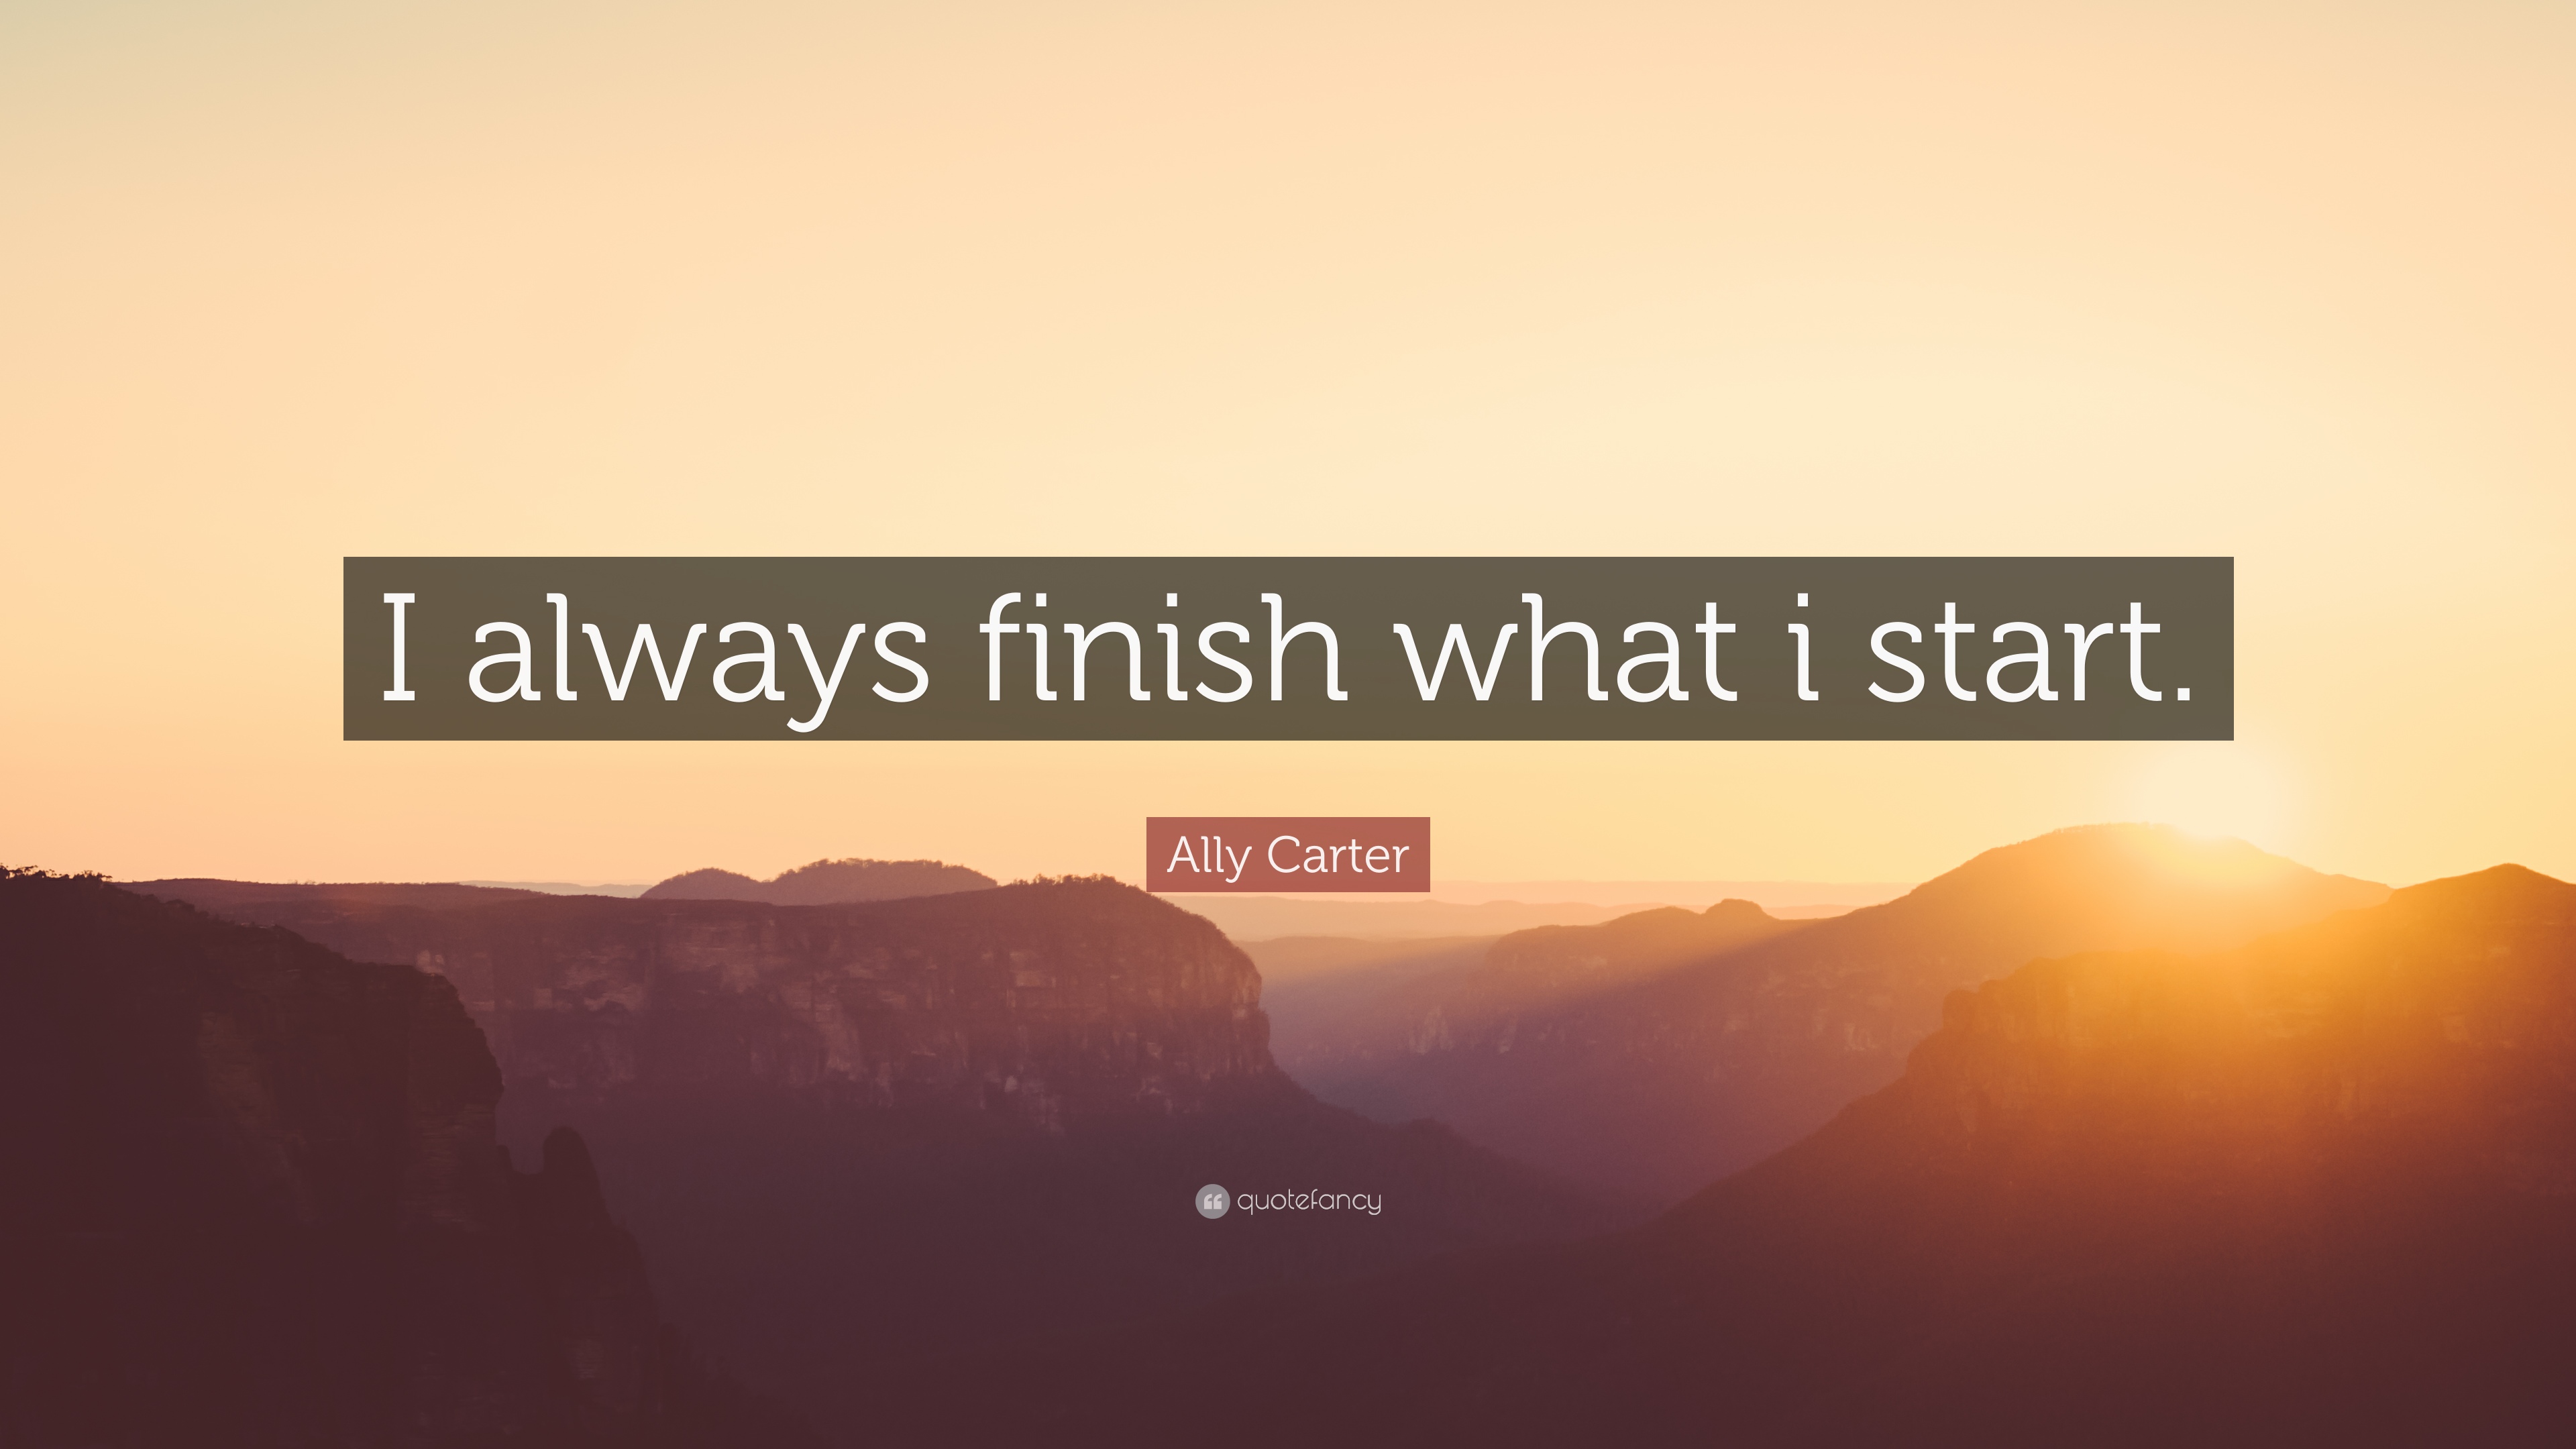 Ally Carter Quote: “I always finish what i start.”